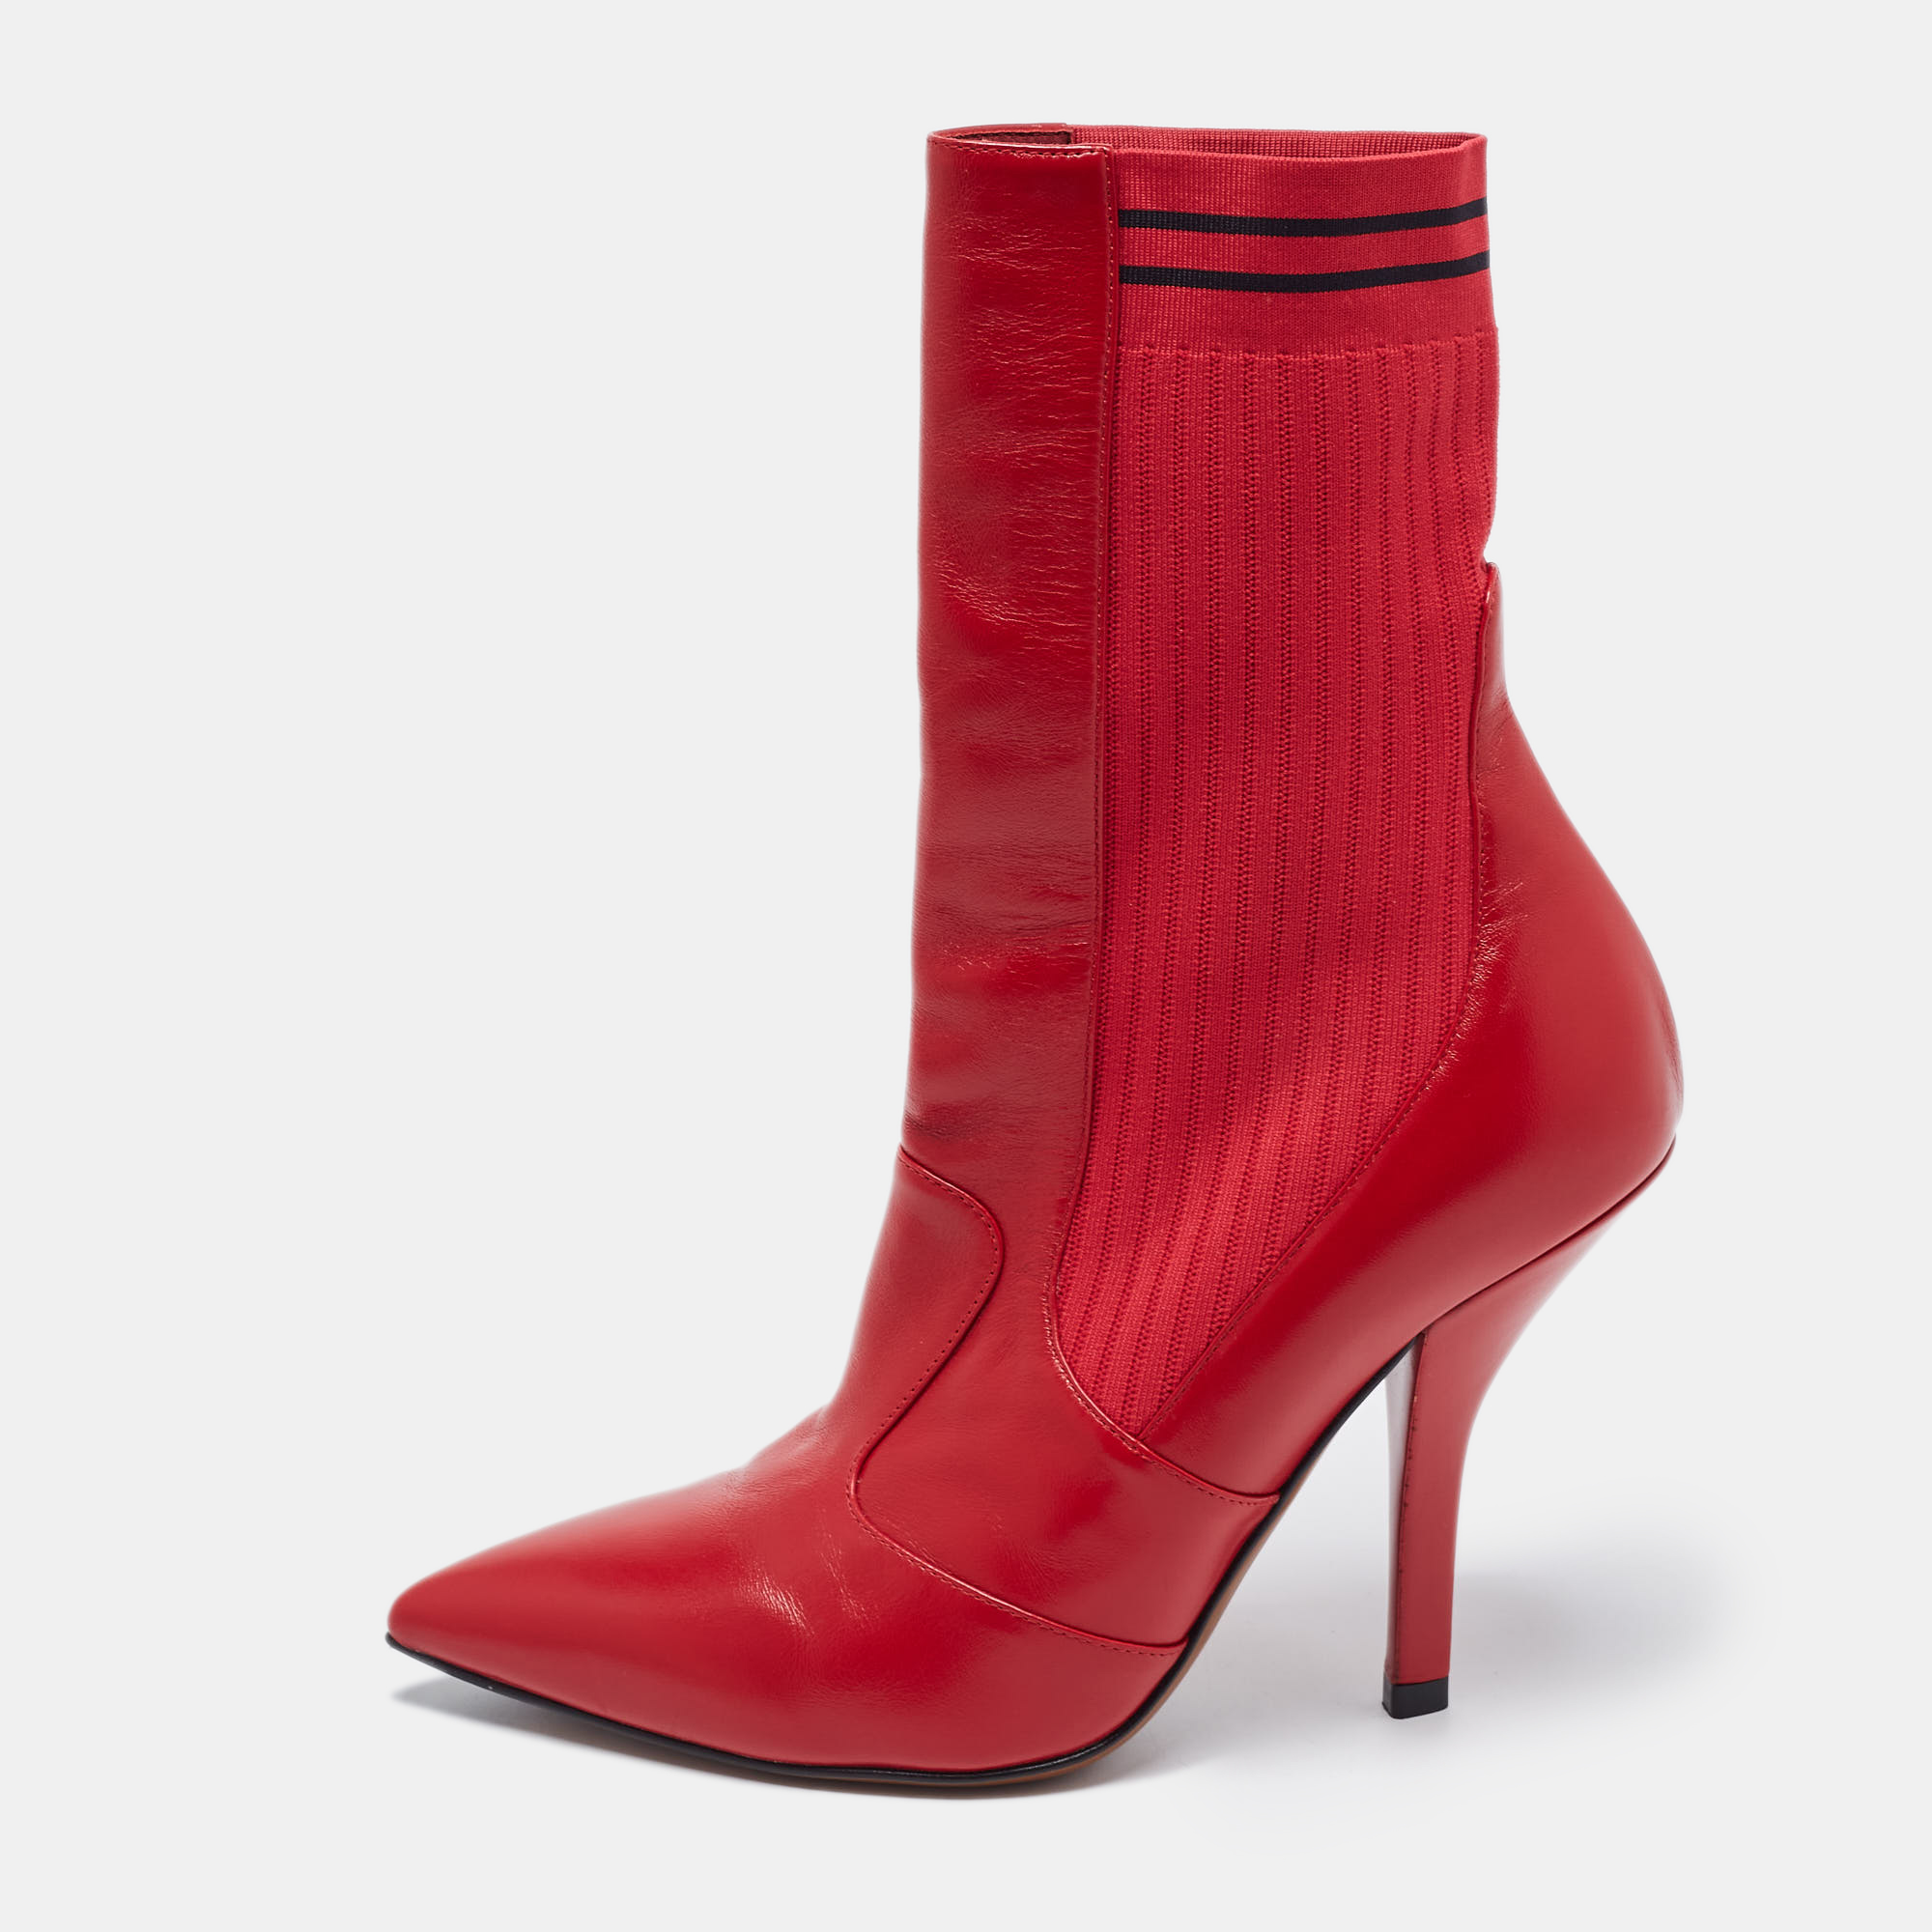 Fendi red leather and knit fabric rockoko boots size 37